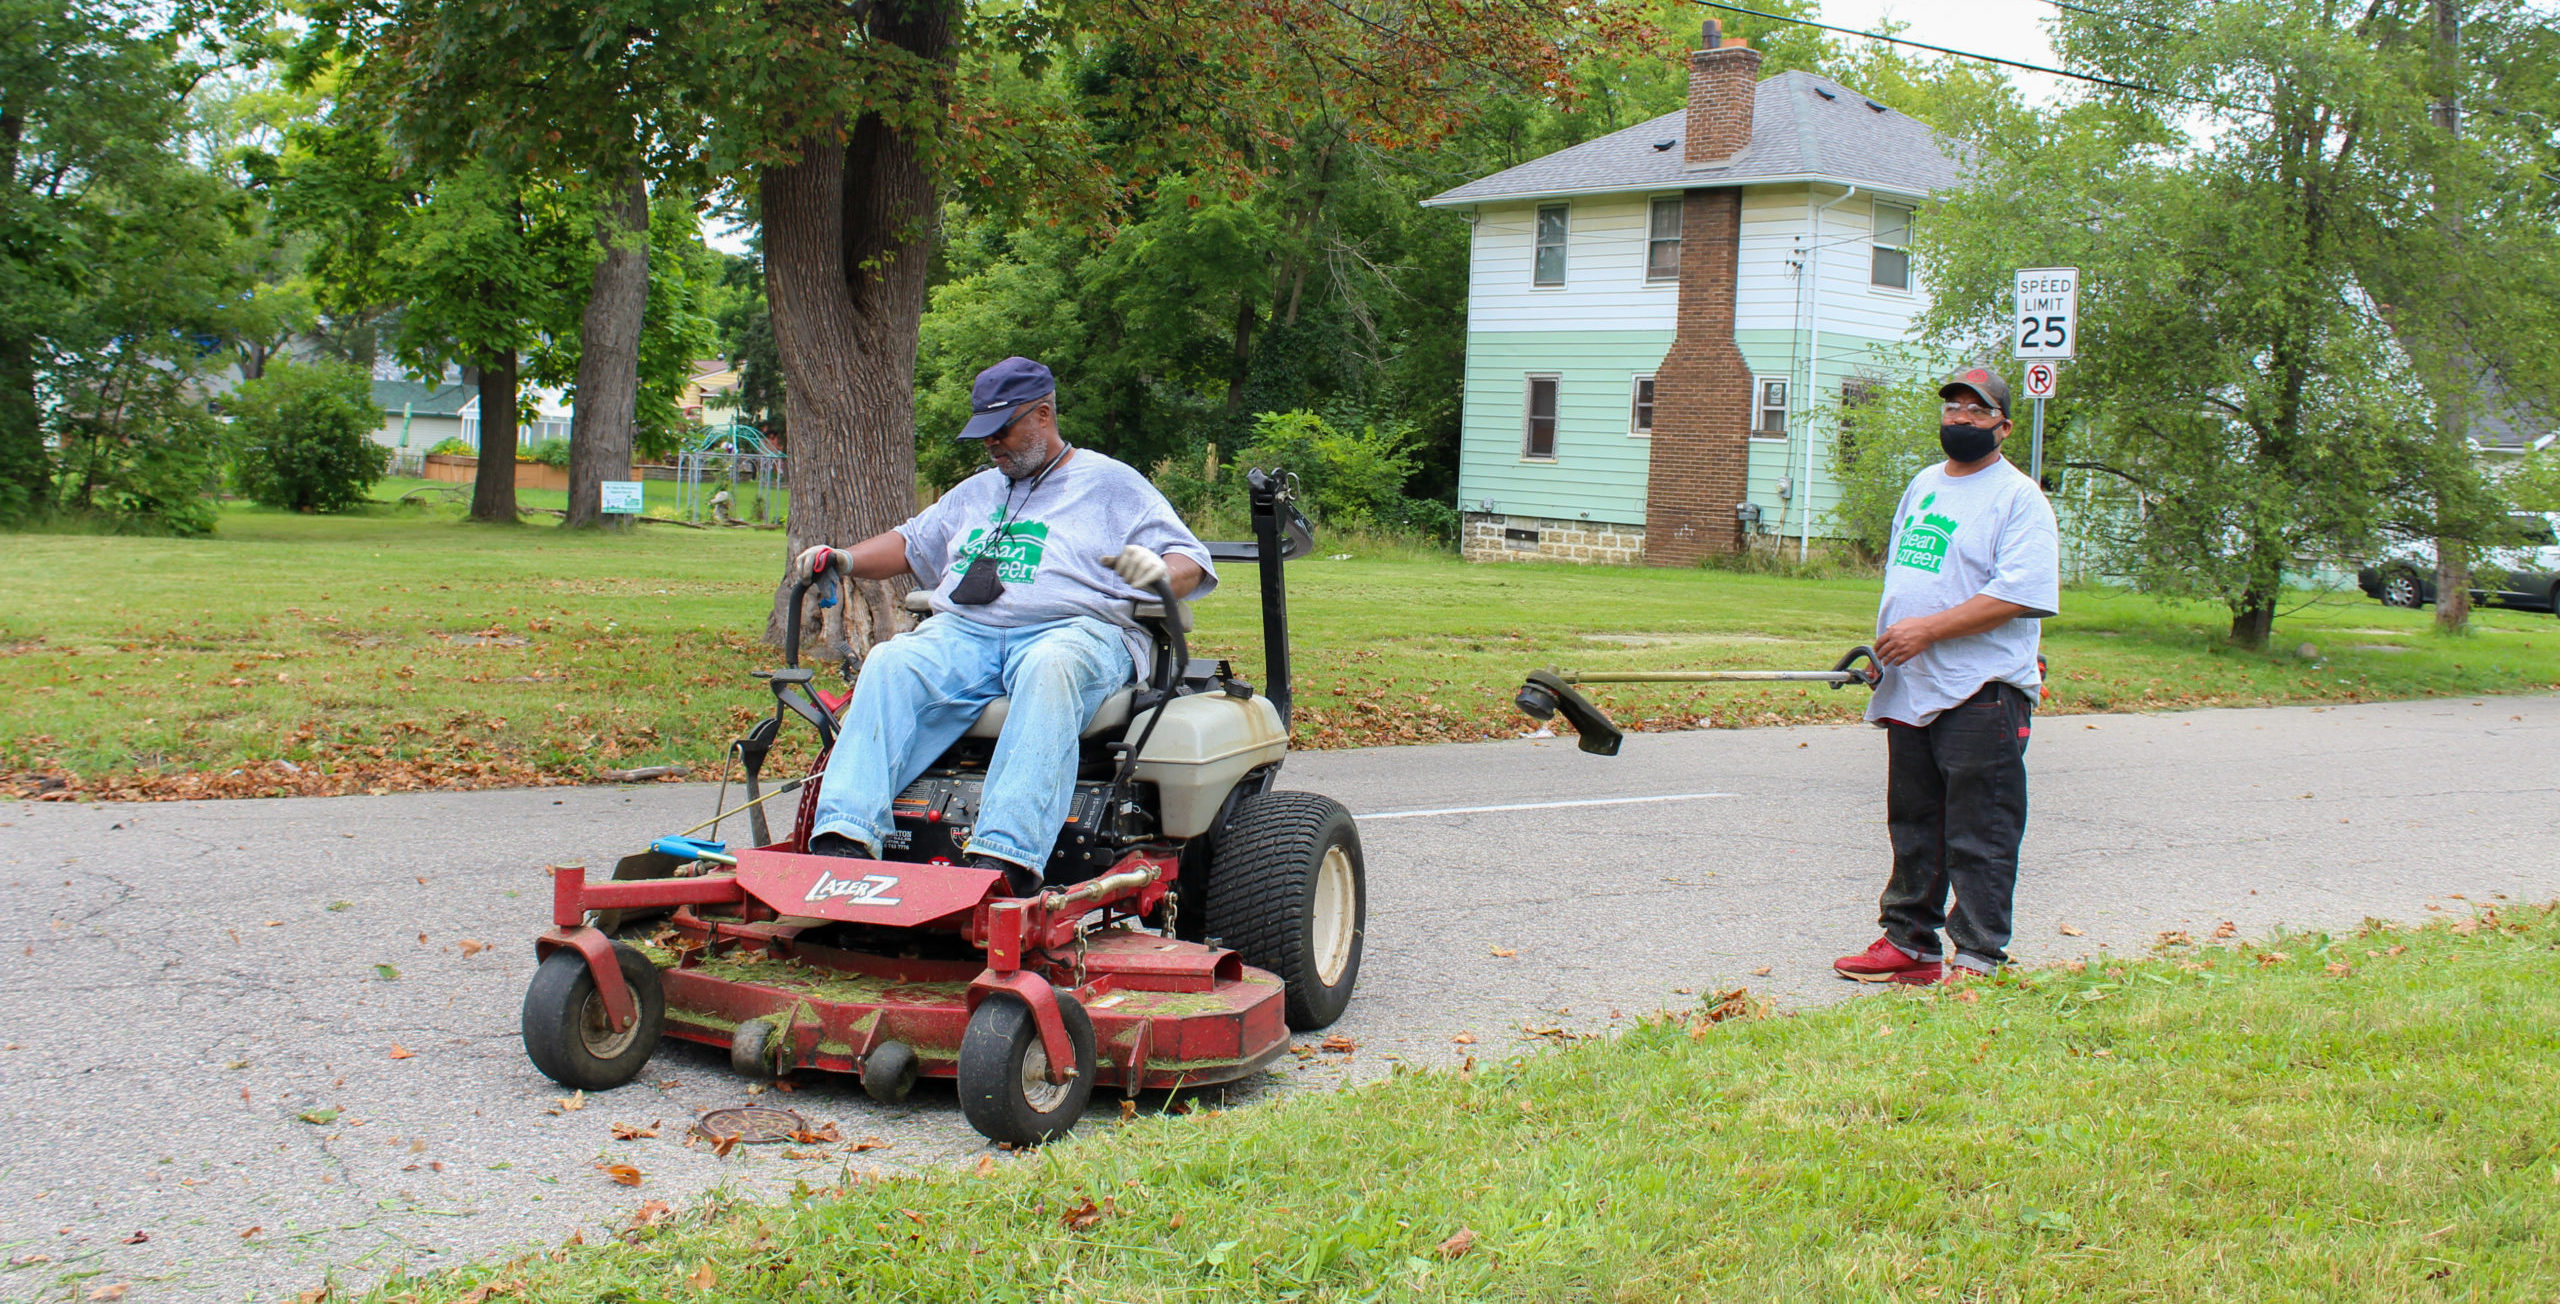 Two men wearing gray Clean & Green T-shirts operate lawn equipment